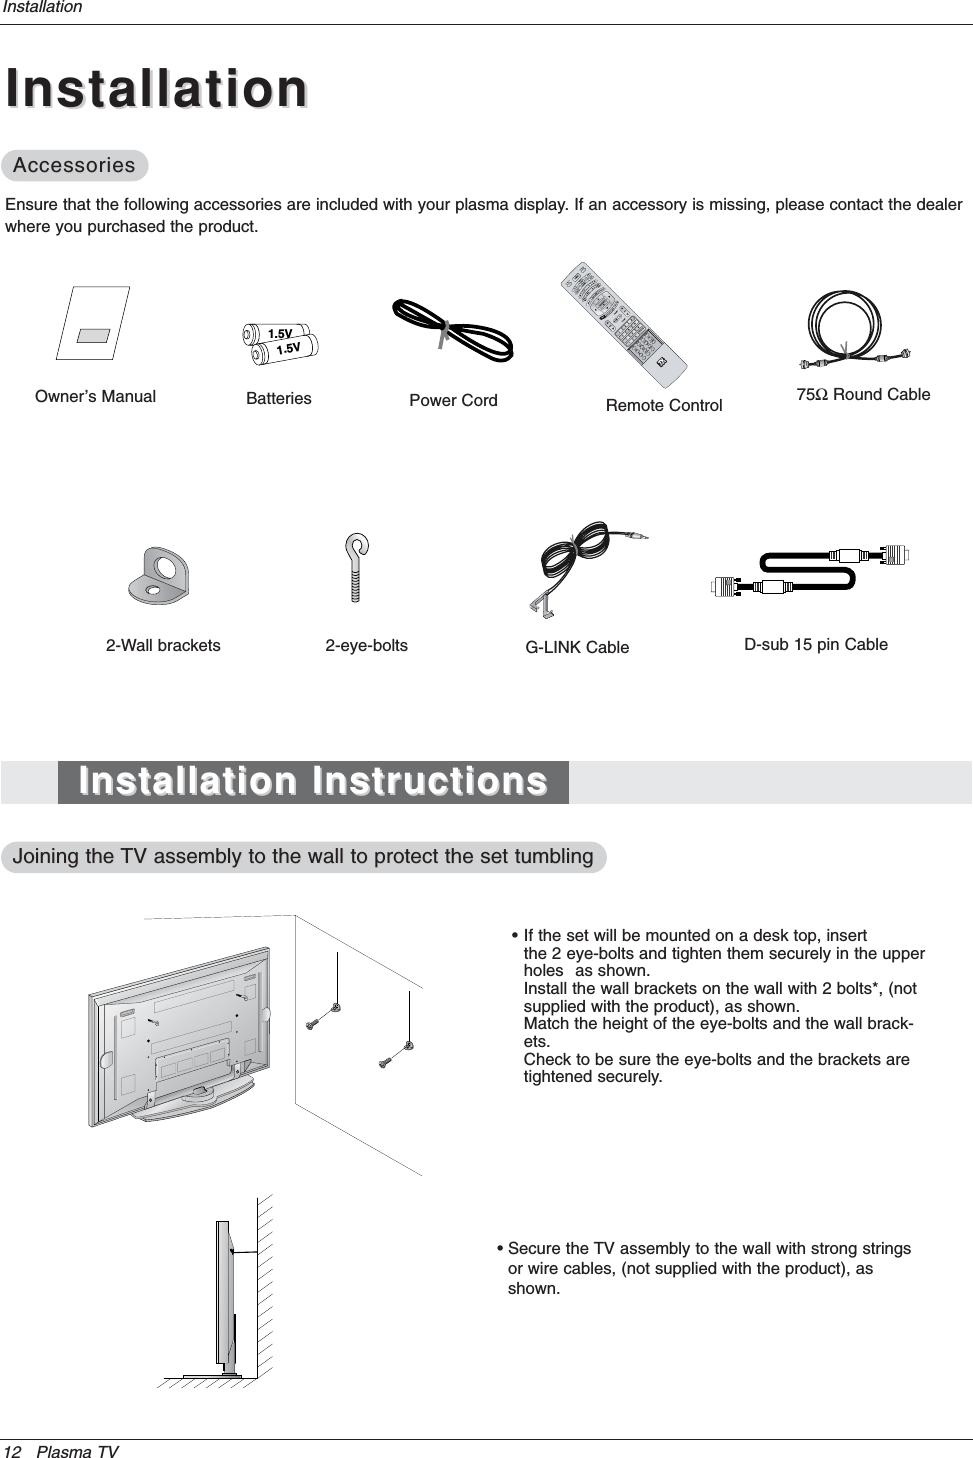 12 Plasma TVInstallationOwner’s Manual1.5V1.5VBatteries Power CordMODEDAY-DAY+FLASHBKAPMCCAUTO DEMOM/C EJECTTV INPUT TV/VIDEO75ΩRound CableEnsure that the following accessories are included with your plasma display. If an accessory is missing, please contact the dealerwhere you purchased the product.• If the set will be mounted on a desk top, insert the 2 eye-bolts and tighten them securely in the upper holes as shown.Install the wall brackets on the wall with 2 bolts*, (not supplied with the product), as shown.Match the height of the eye-bolts and the wall brack-ets.Check to be sure the eye-bolts and the brackets are tightened securely.• Secure the TV assembly to the wall with strong stringsor wire cables, (not supplied with the product), asshown.2-Wall brackets 2-eye-bolts G-LINK CableRemote ControlInstallationInstallationAccessoriesAccessoriesInstallation InstructionsInstallation InstructionsJoining the Joining the TV assembly to the wall to protect the set tumblingTV assembly to the wall to protect the set tumblingD-sub 15 pin Cable